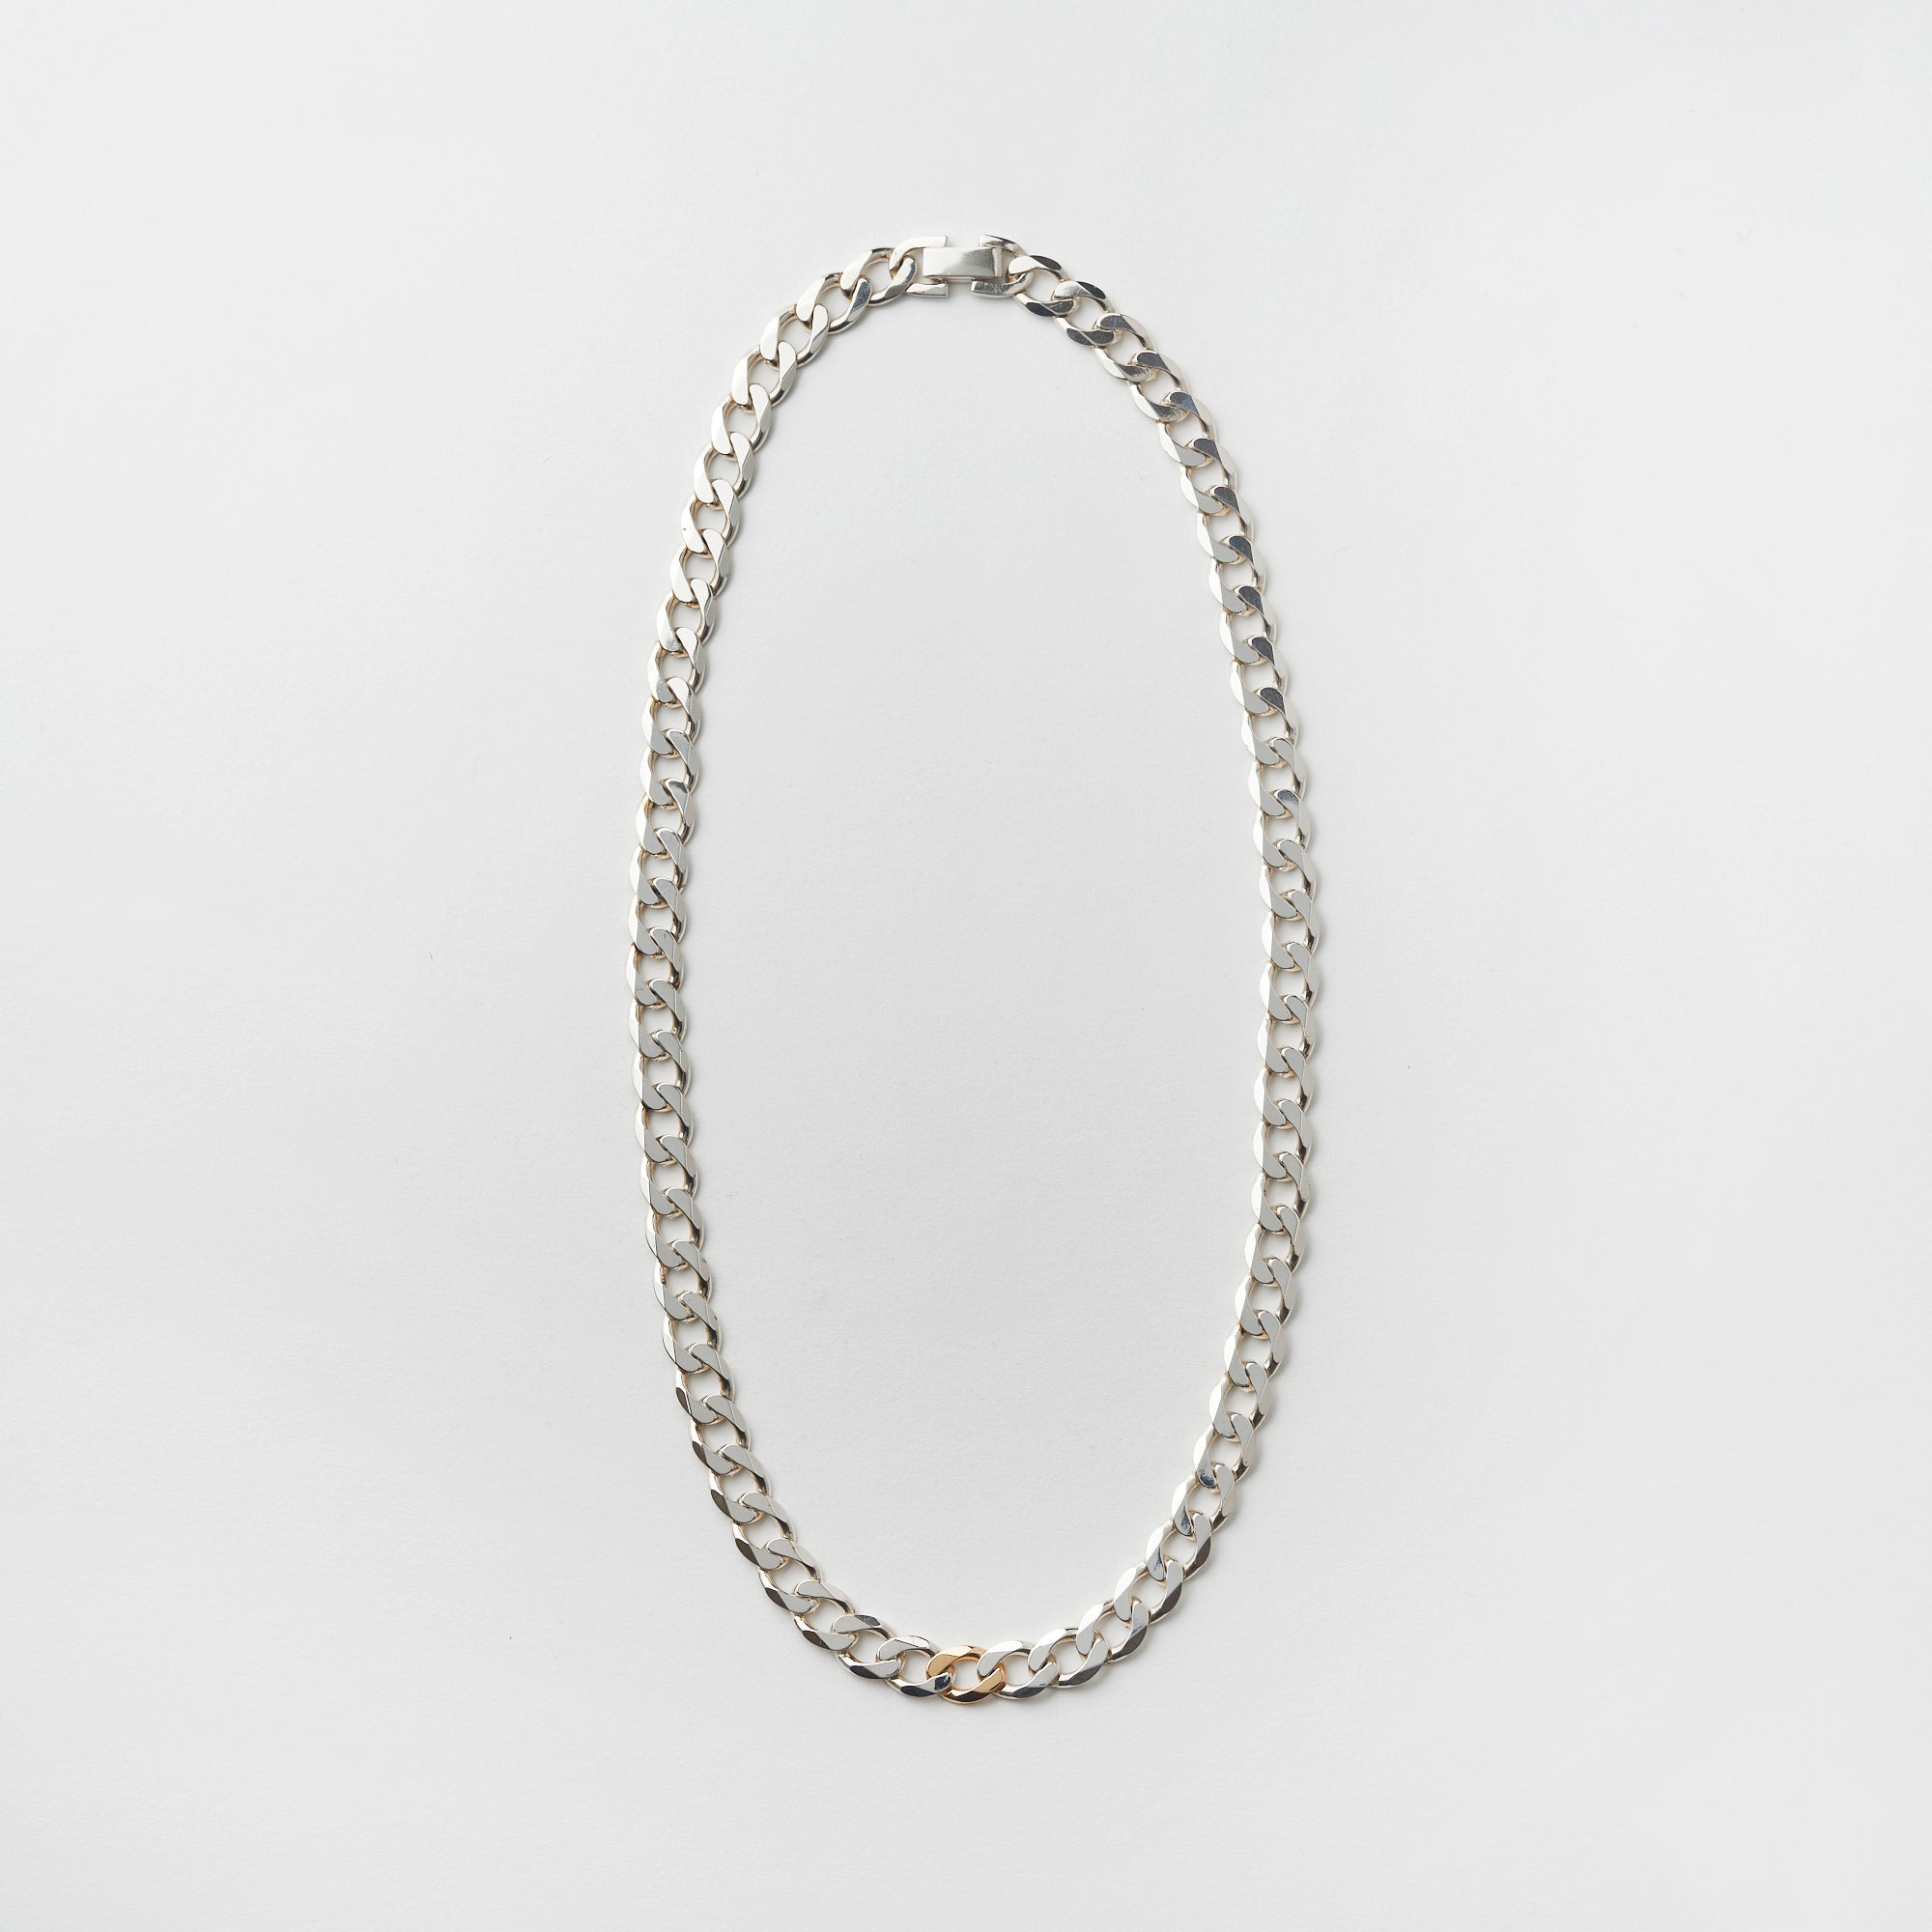 SMALL LIGHT CURB CHAIN NECKLACE